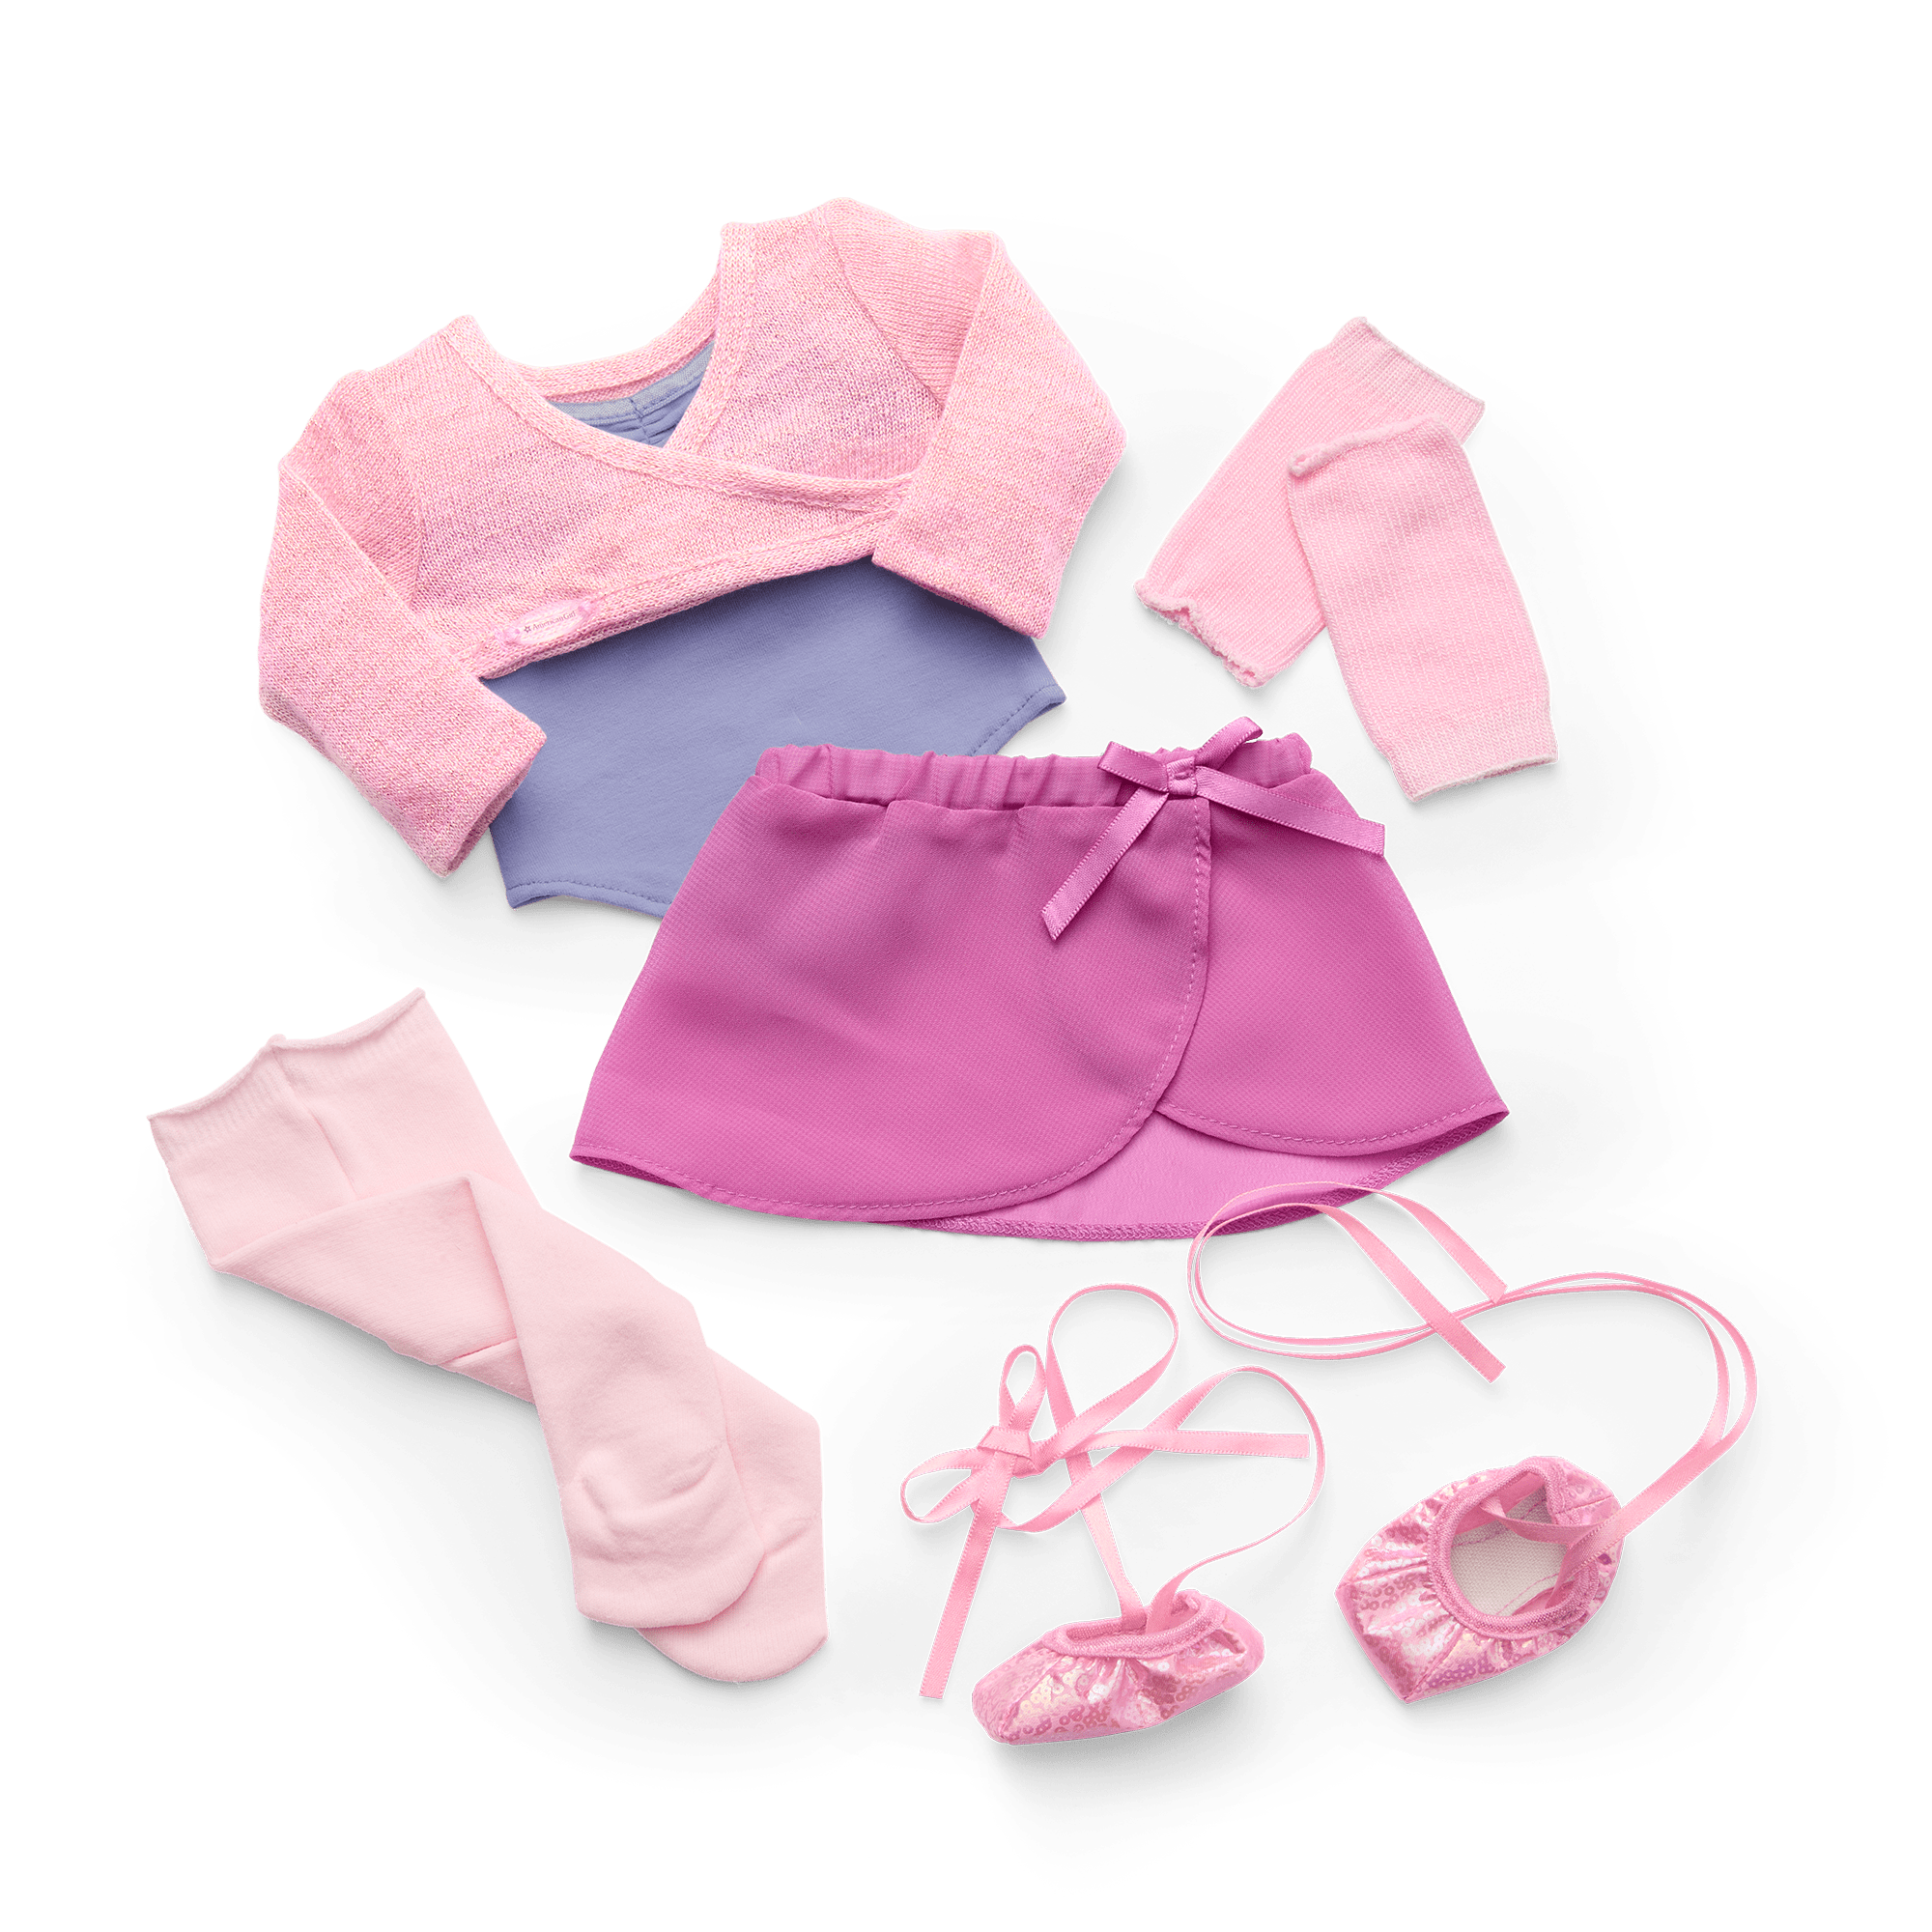 Our Generation 18 Doll Yoga Outfit – TOYCYCLE